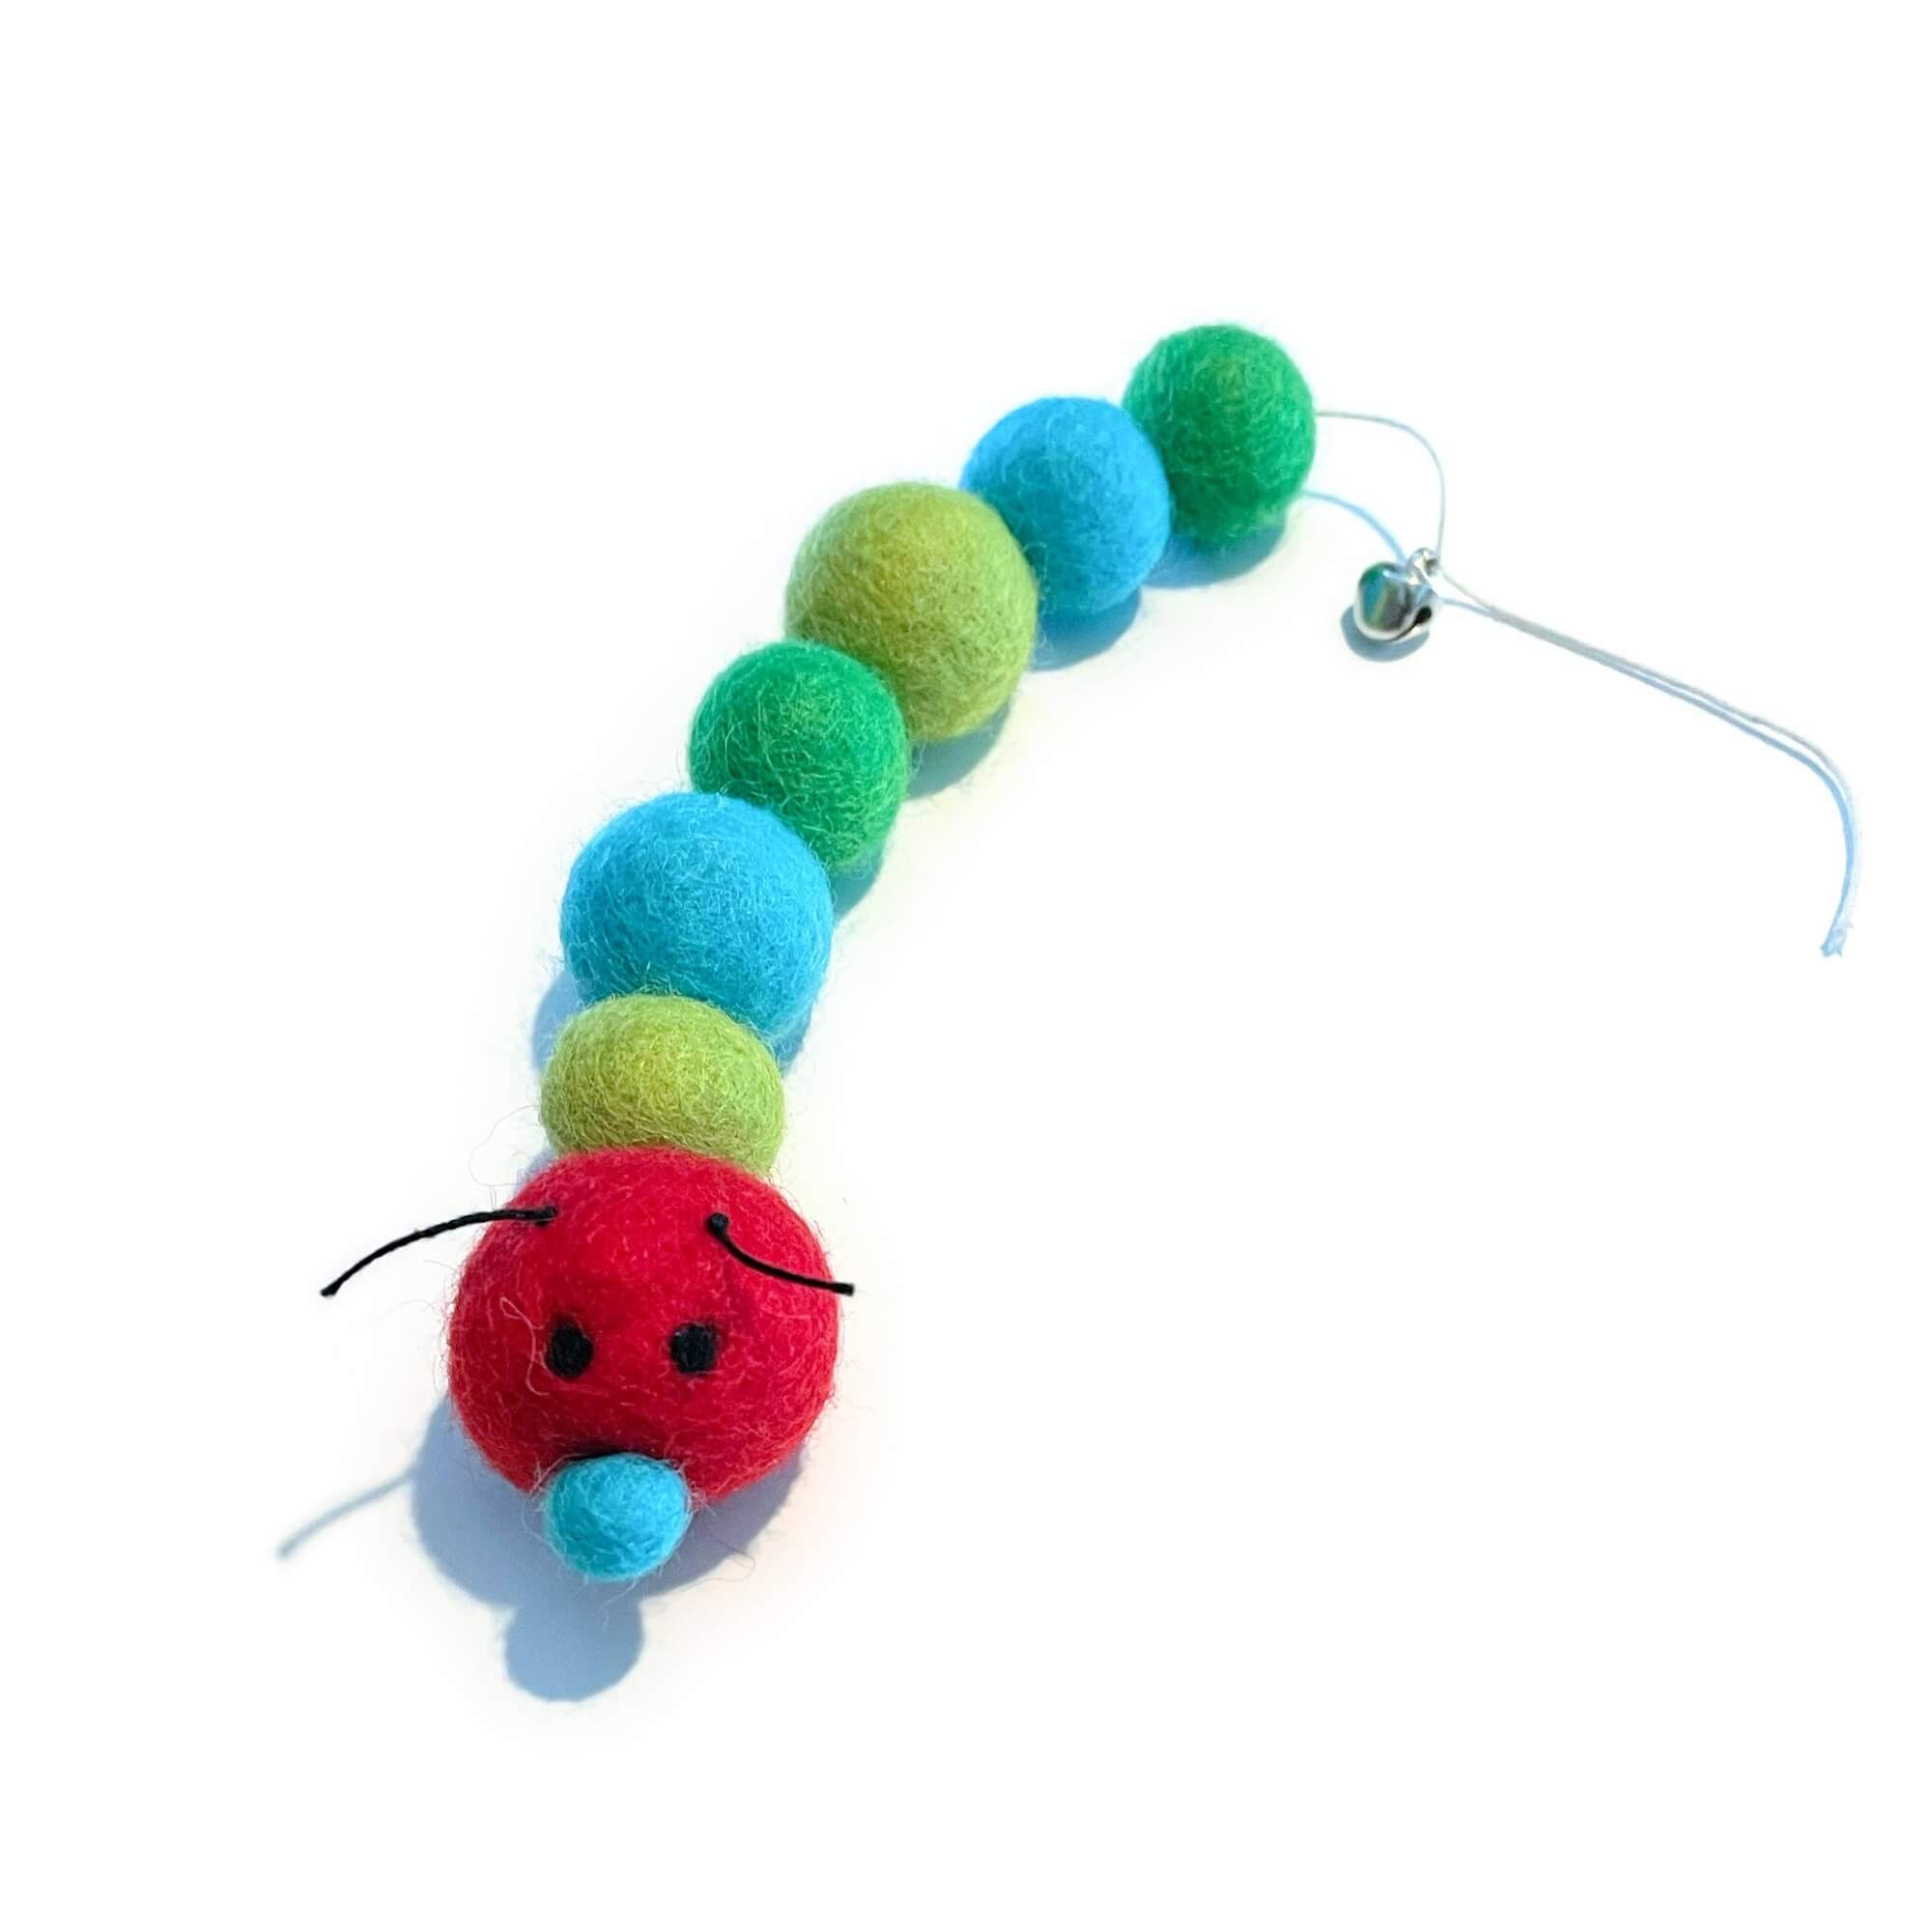 Organic wool caterpillar cat toy in red, blue & green tones. Has bell at the end of its tail.